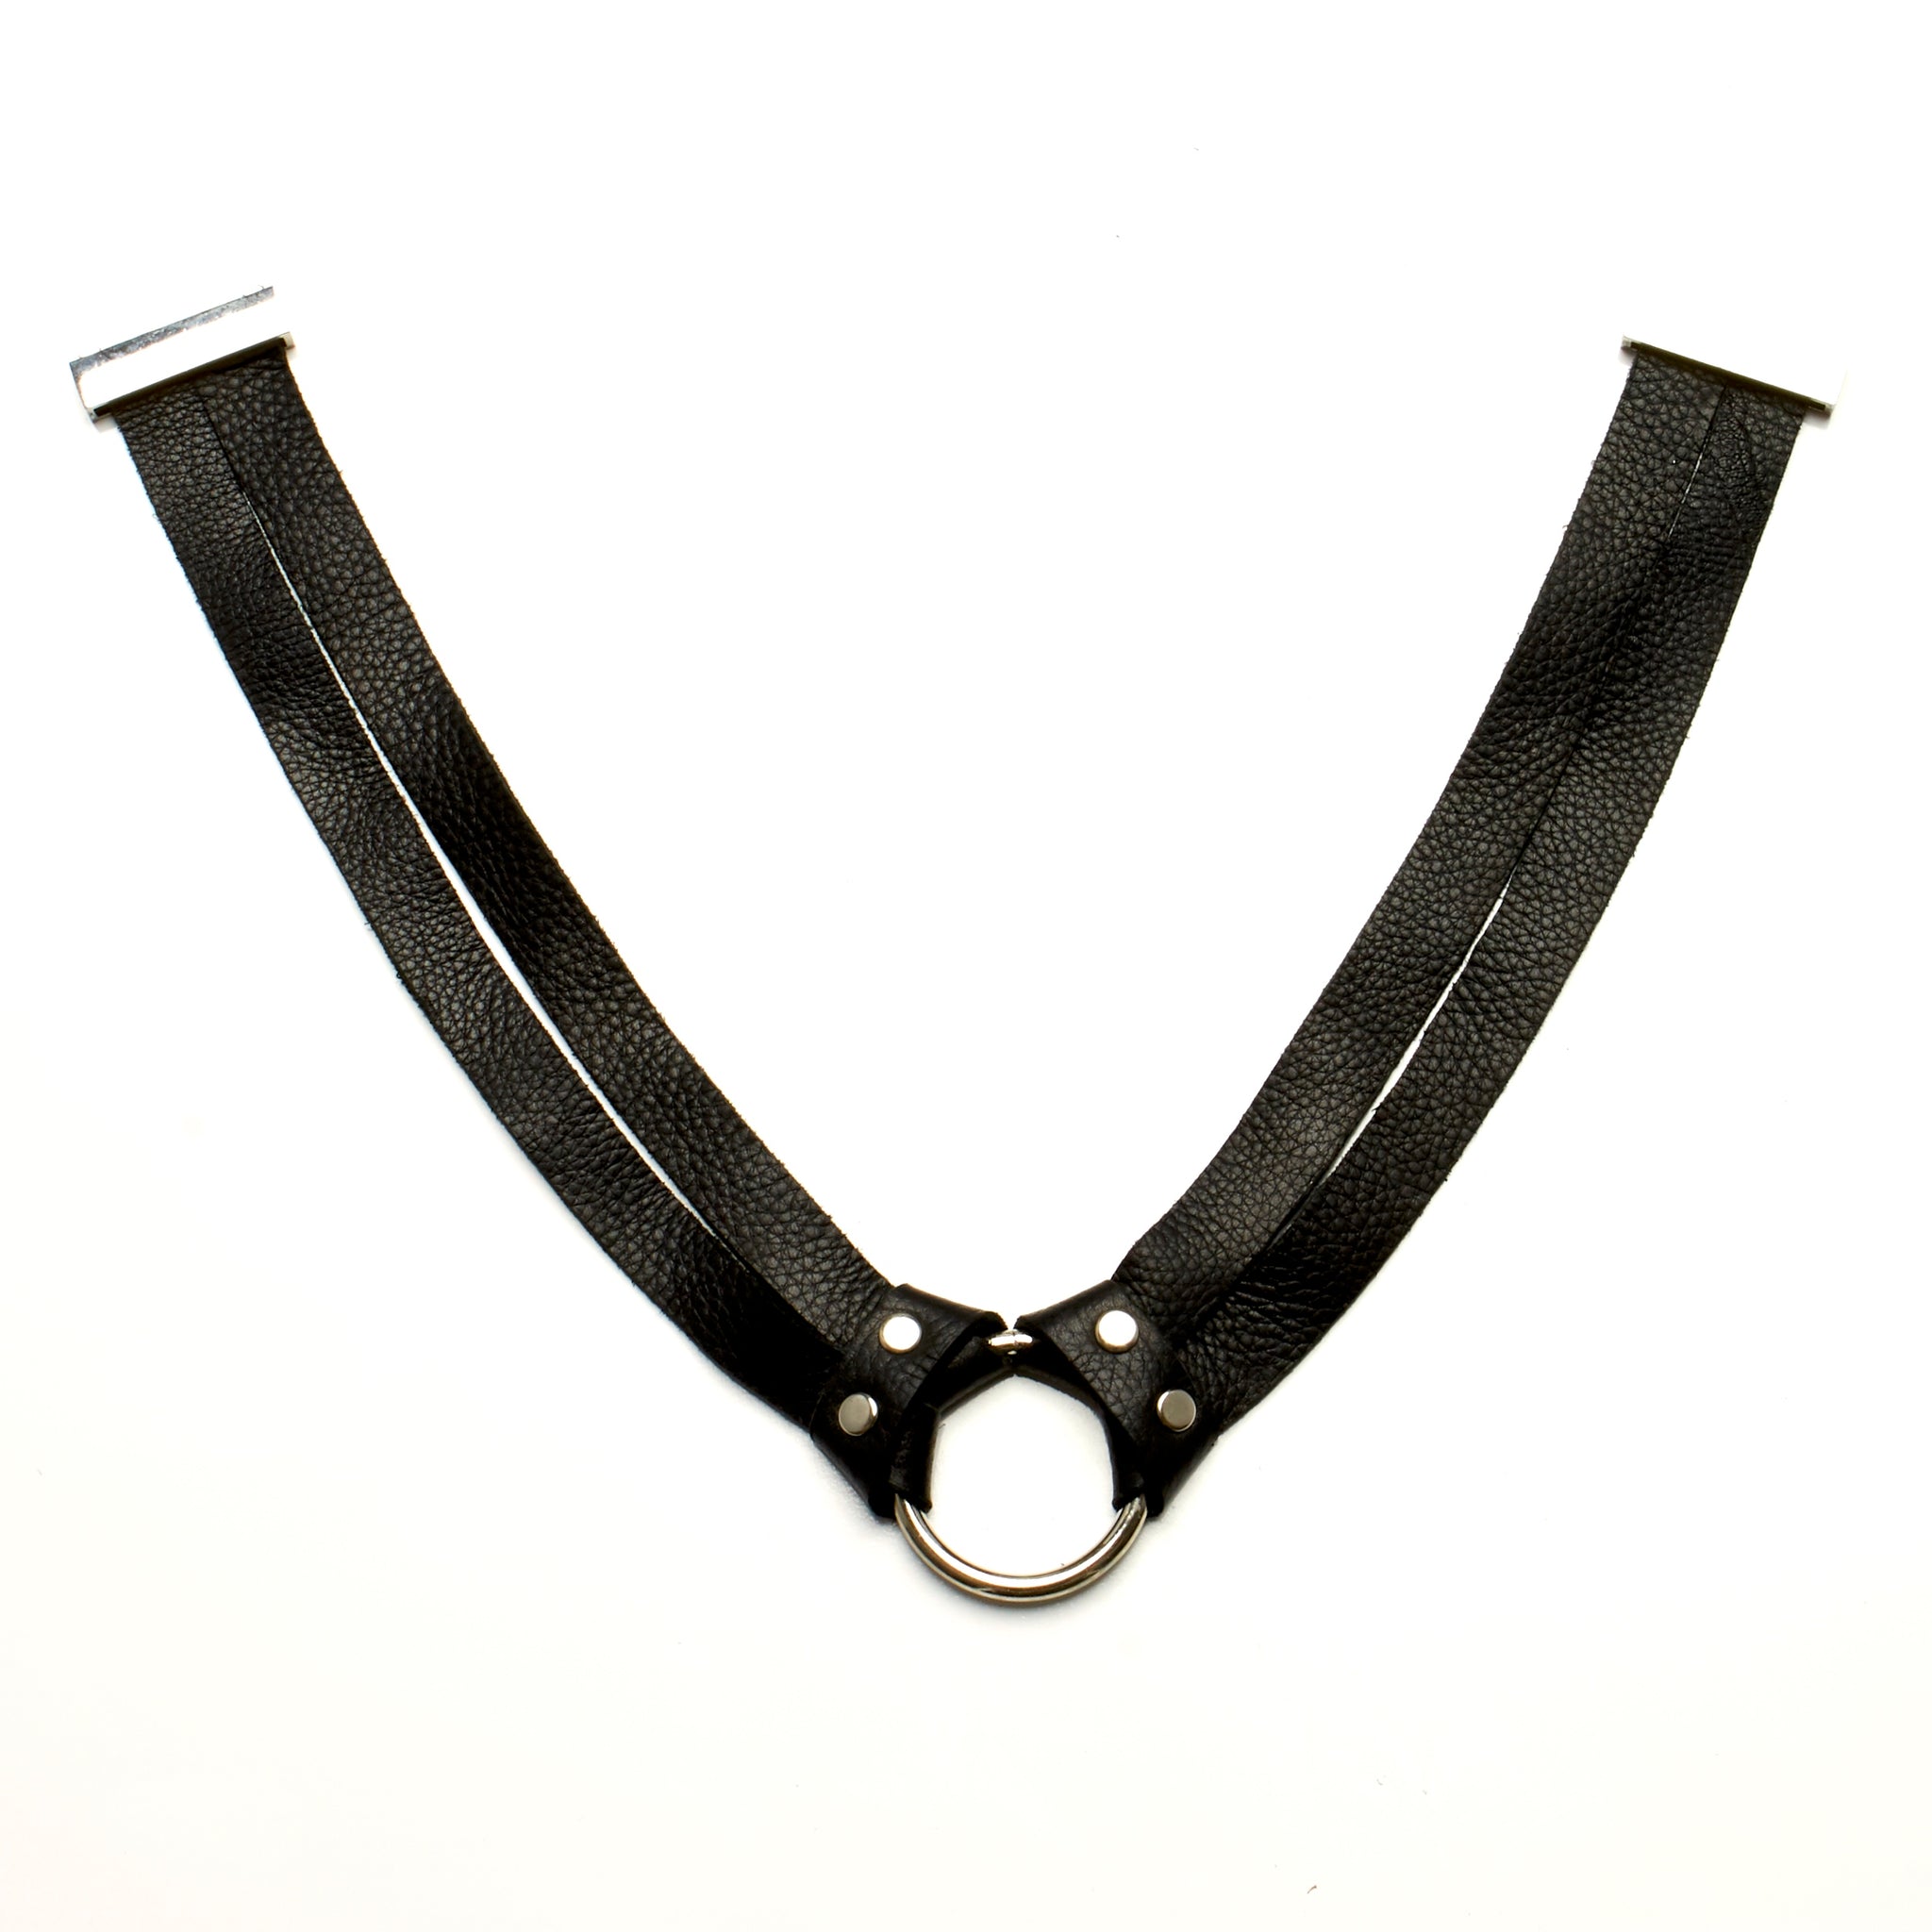 TWO STRAND DEERSKIN LEATHER CHOKER NECKLACE WITH STAINLESS STEEL RING.  BY NYET JEWELRY